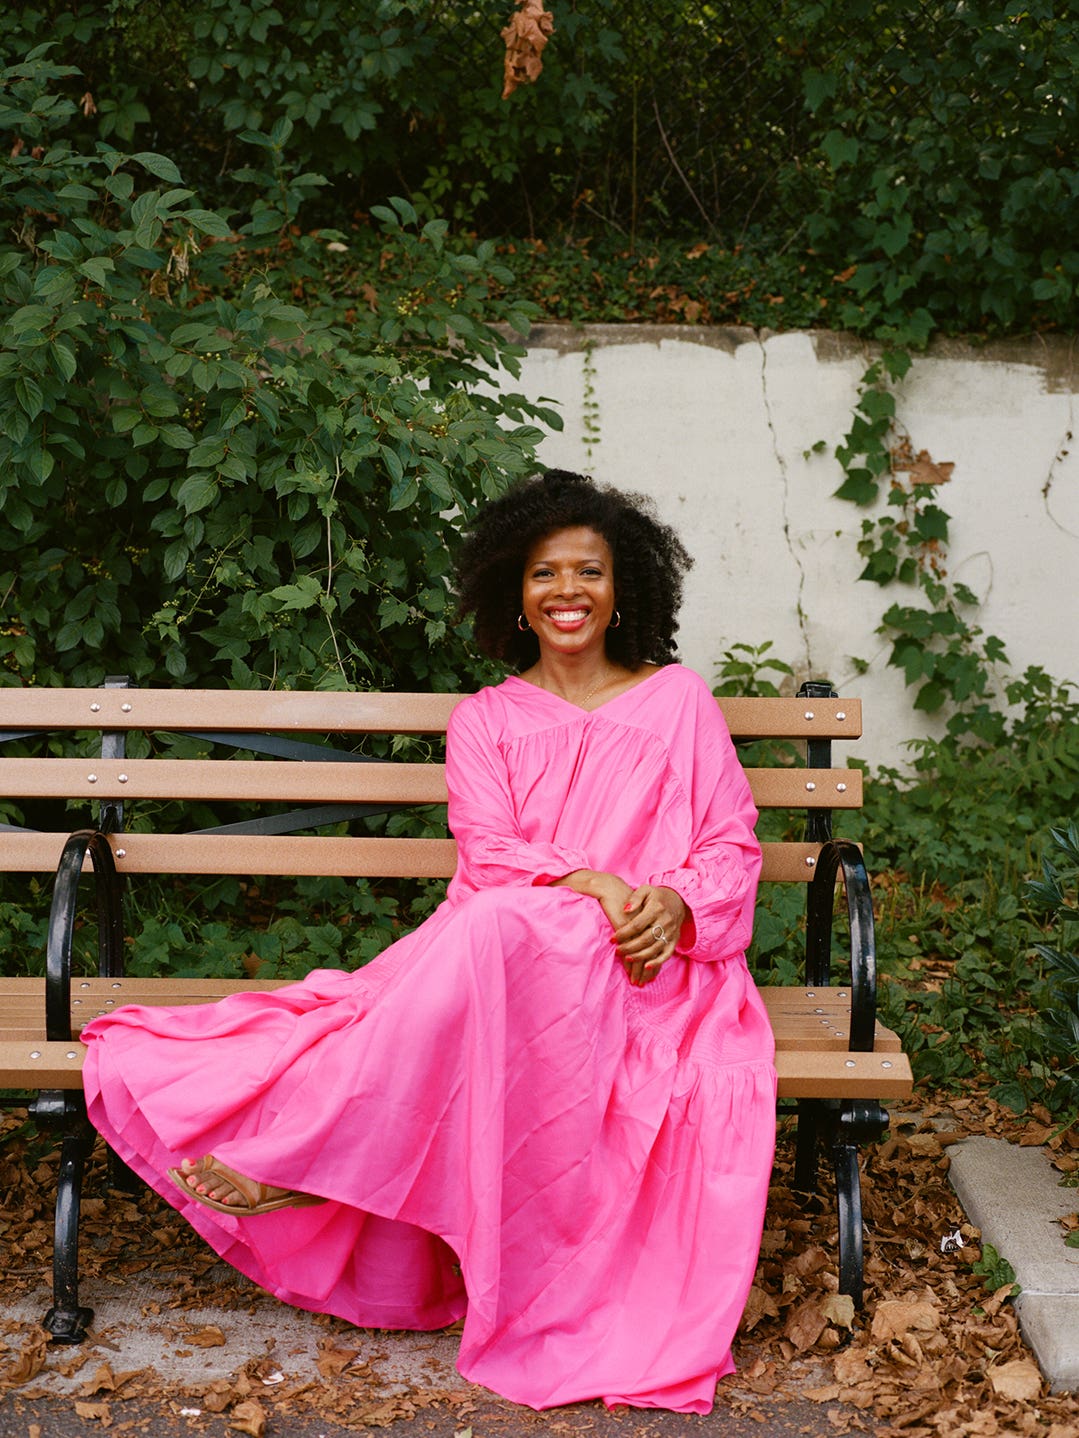 Woman on bench in a Barbie pink dress